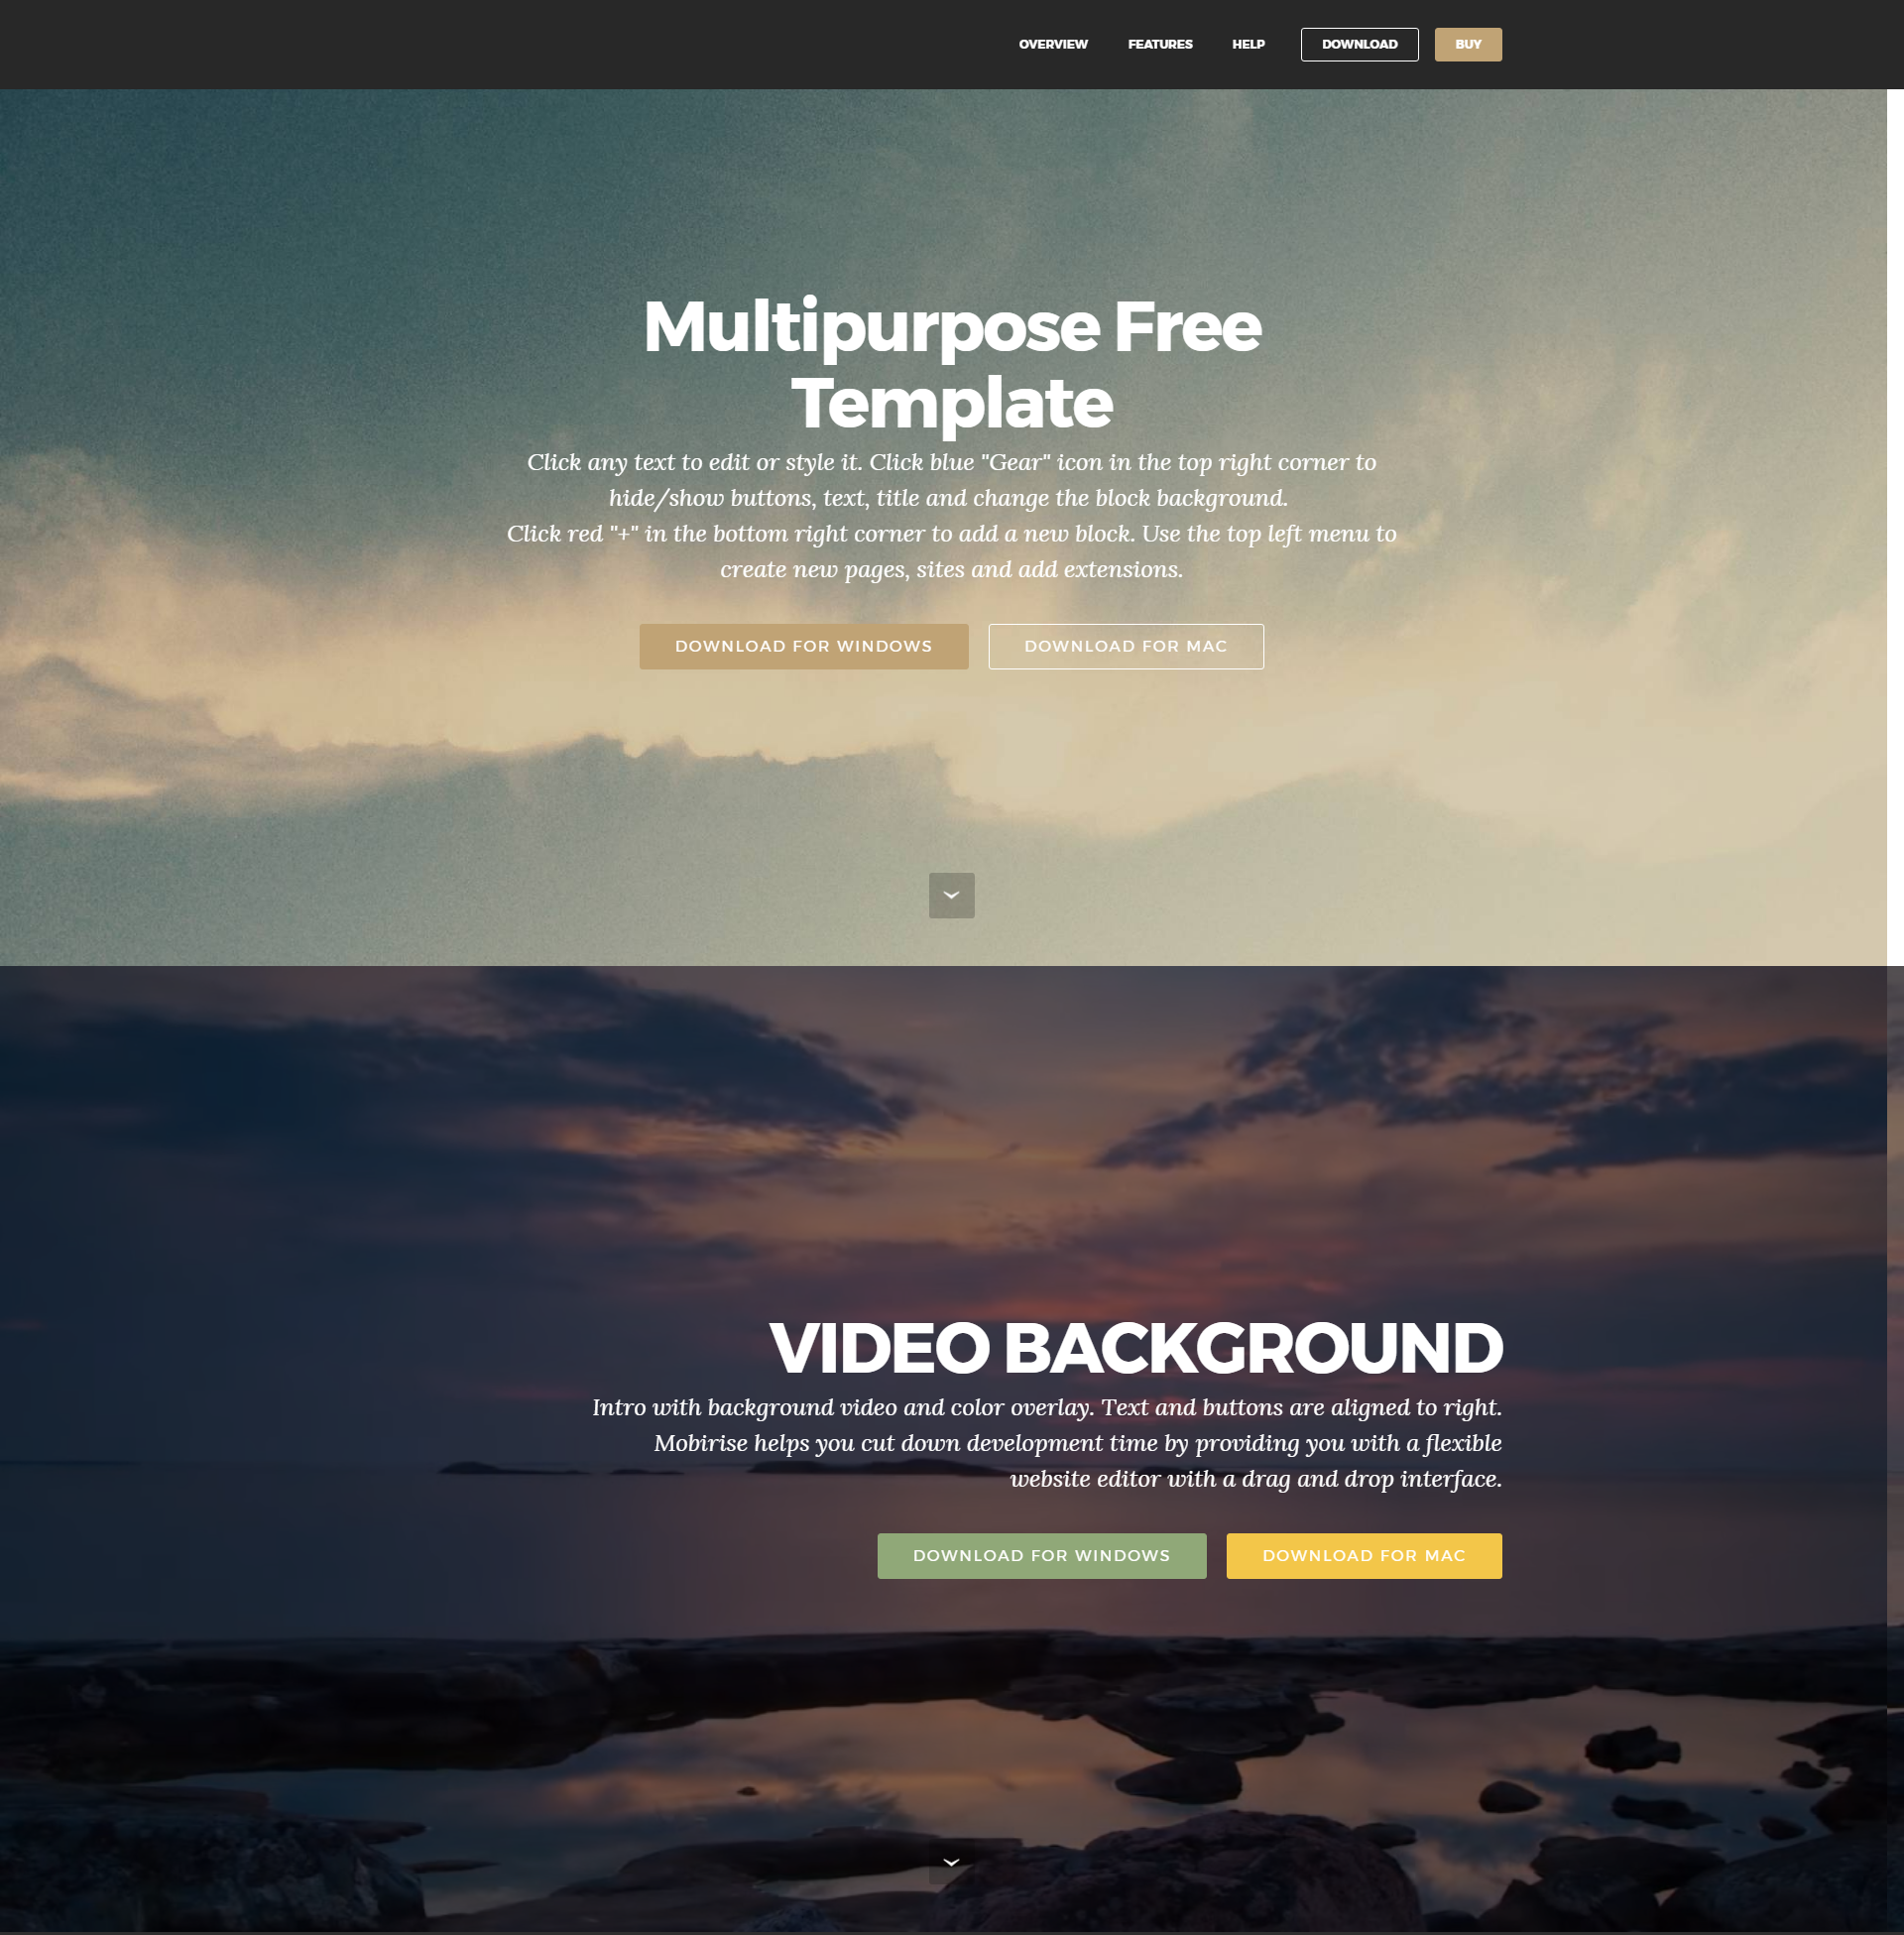 Multipurpose Free Bootstrap Template